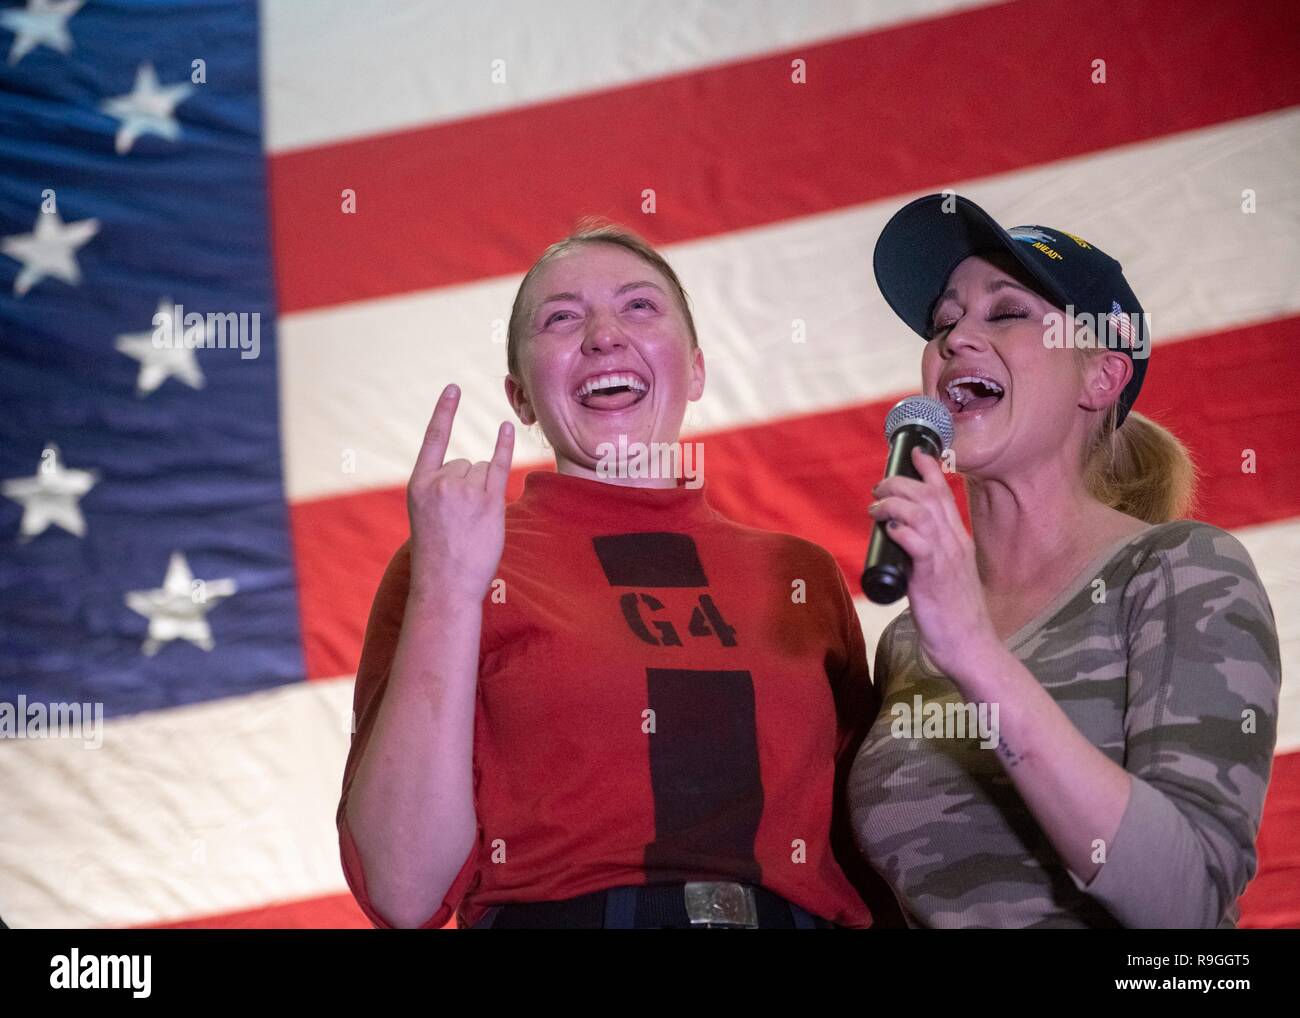 Country Music Singer Kellie Pickler, right, performs with a sailor during the Joint Chiefs USO Christmas Show for deployed service members aboard the aircraft carrier USS John C. Stennis  December 23, 2018 in the Persian Gulf. This year’s entertainers include actors Milo Ventimiglia, Wilmer Valderrama, DJ J Dayz, Fittest Man on Earth Matt Fraser, 3-time Olympic Gold Medalist Shaun White, Country Music Singer Kellie Pickler, and comedian Jessiemae Peluso. Stock Photo